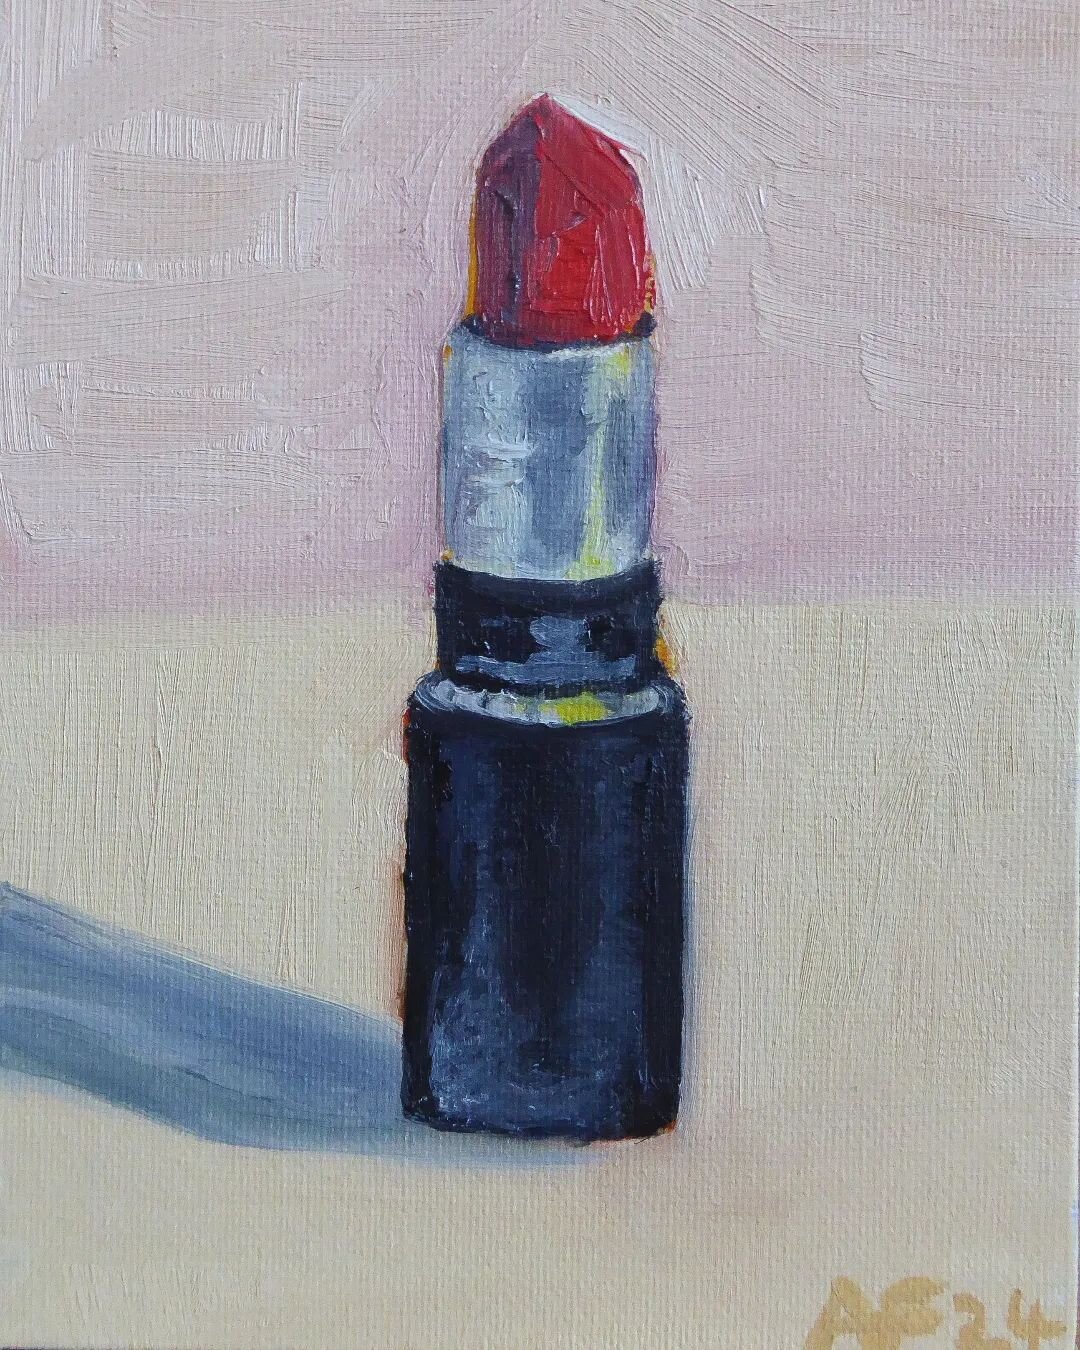 Lipstick study💄

Oil on canvas, 7x5&quot;, 2024

A fun study I completed recently. I don't really wear red lipstick much, so this baby is in pristine condition... perfect for painting.

#oilstudy #oilpaint #oiloncanvas #painting🎨 #paintingfromlife 